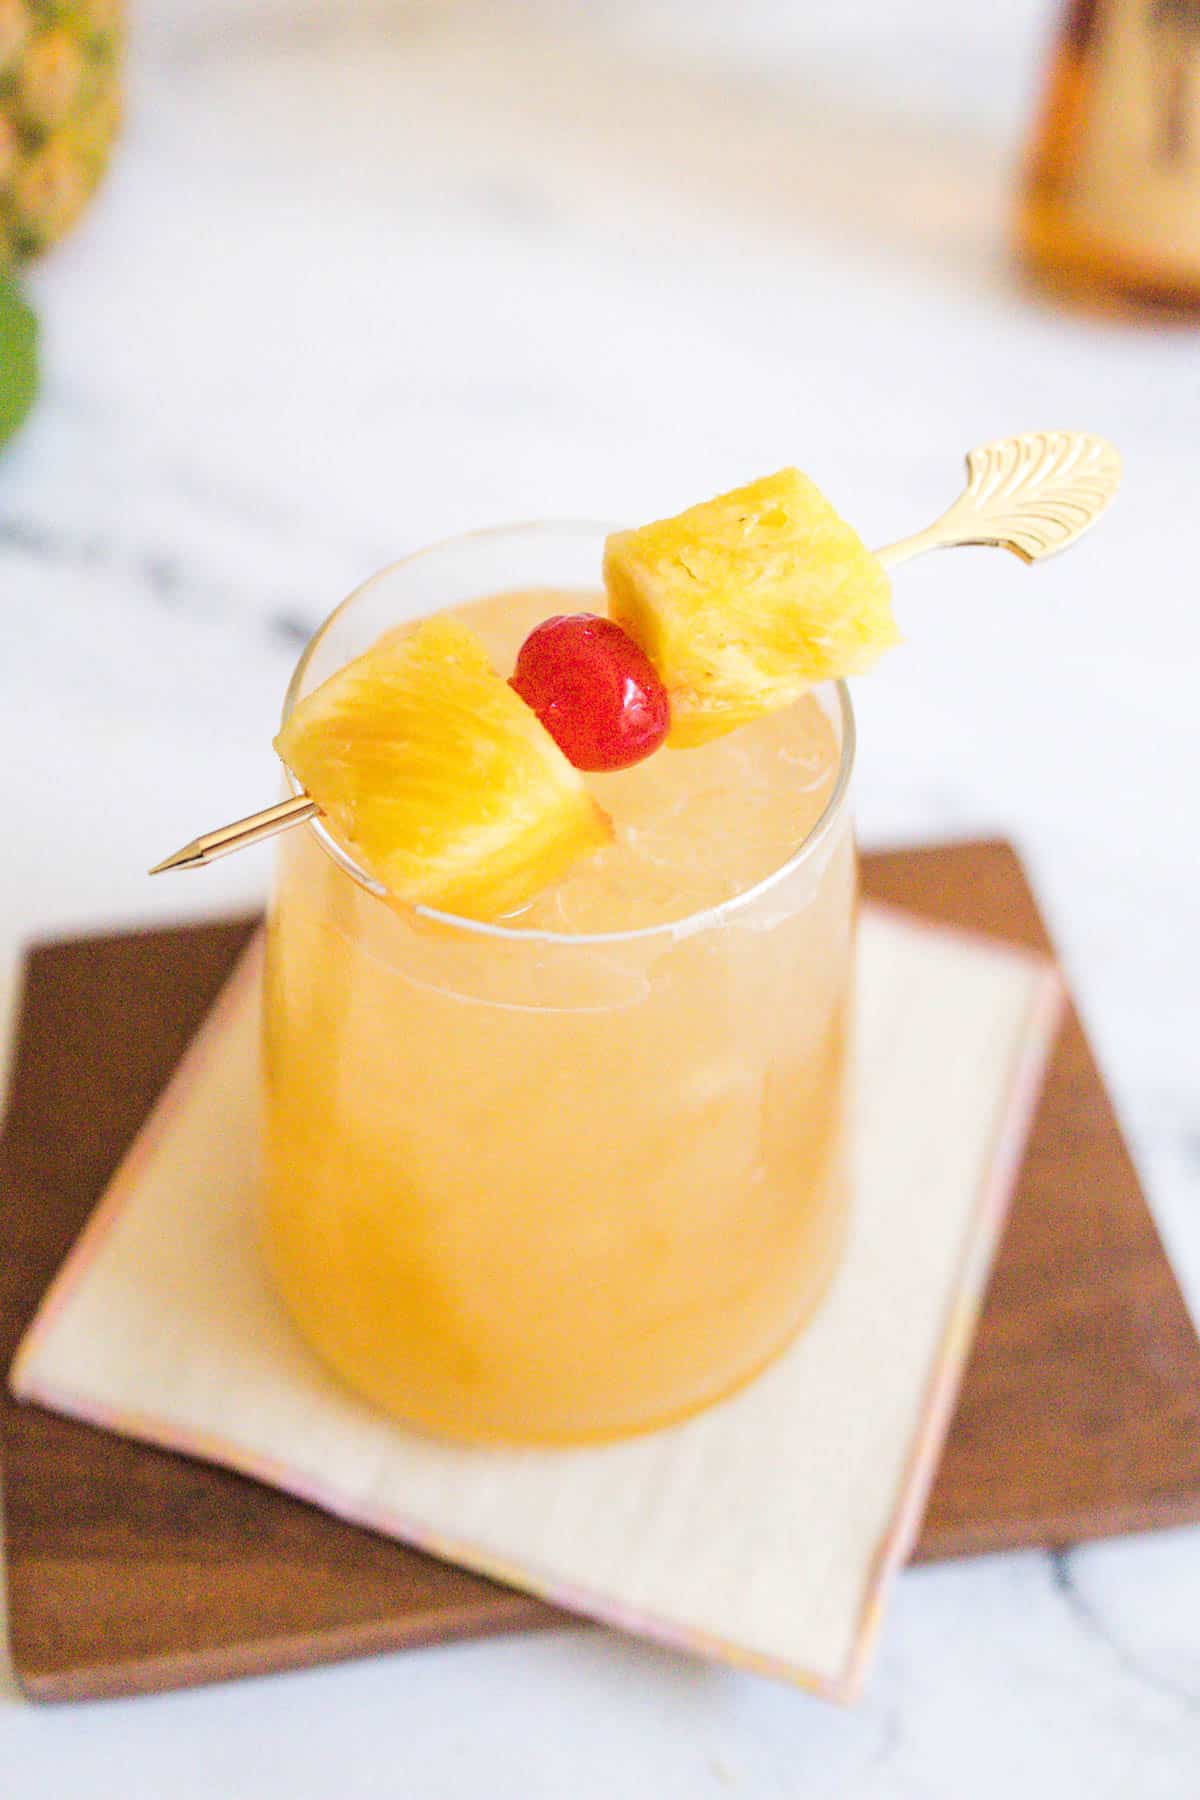 Tropical fruit cocktail garnished with pineapple chunks and a cocktail cherry on a cocktail stick.